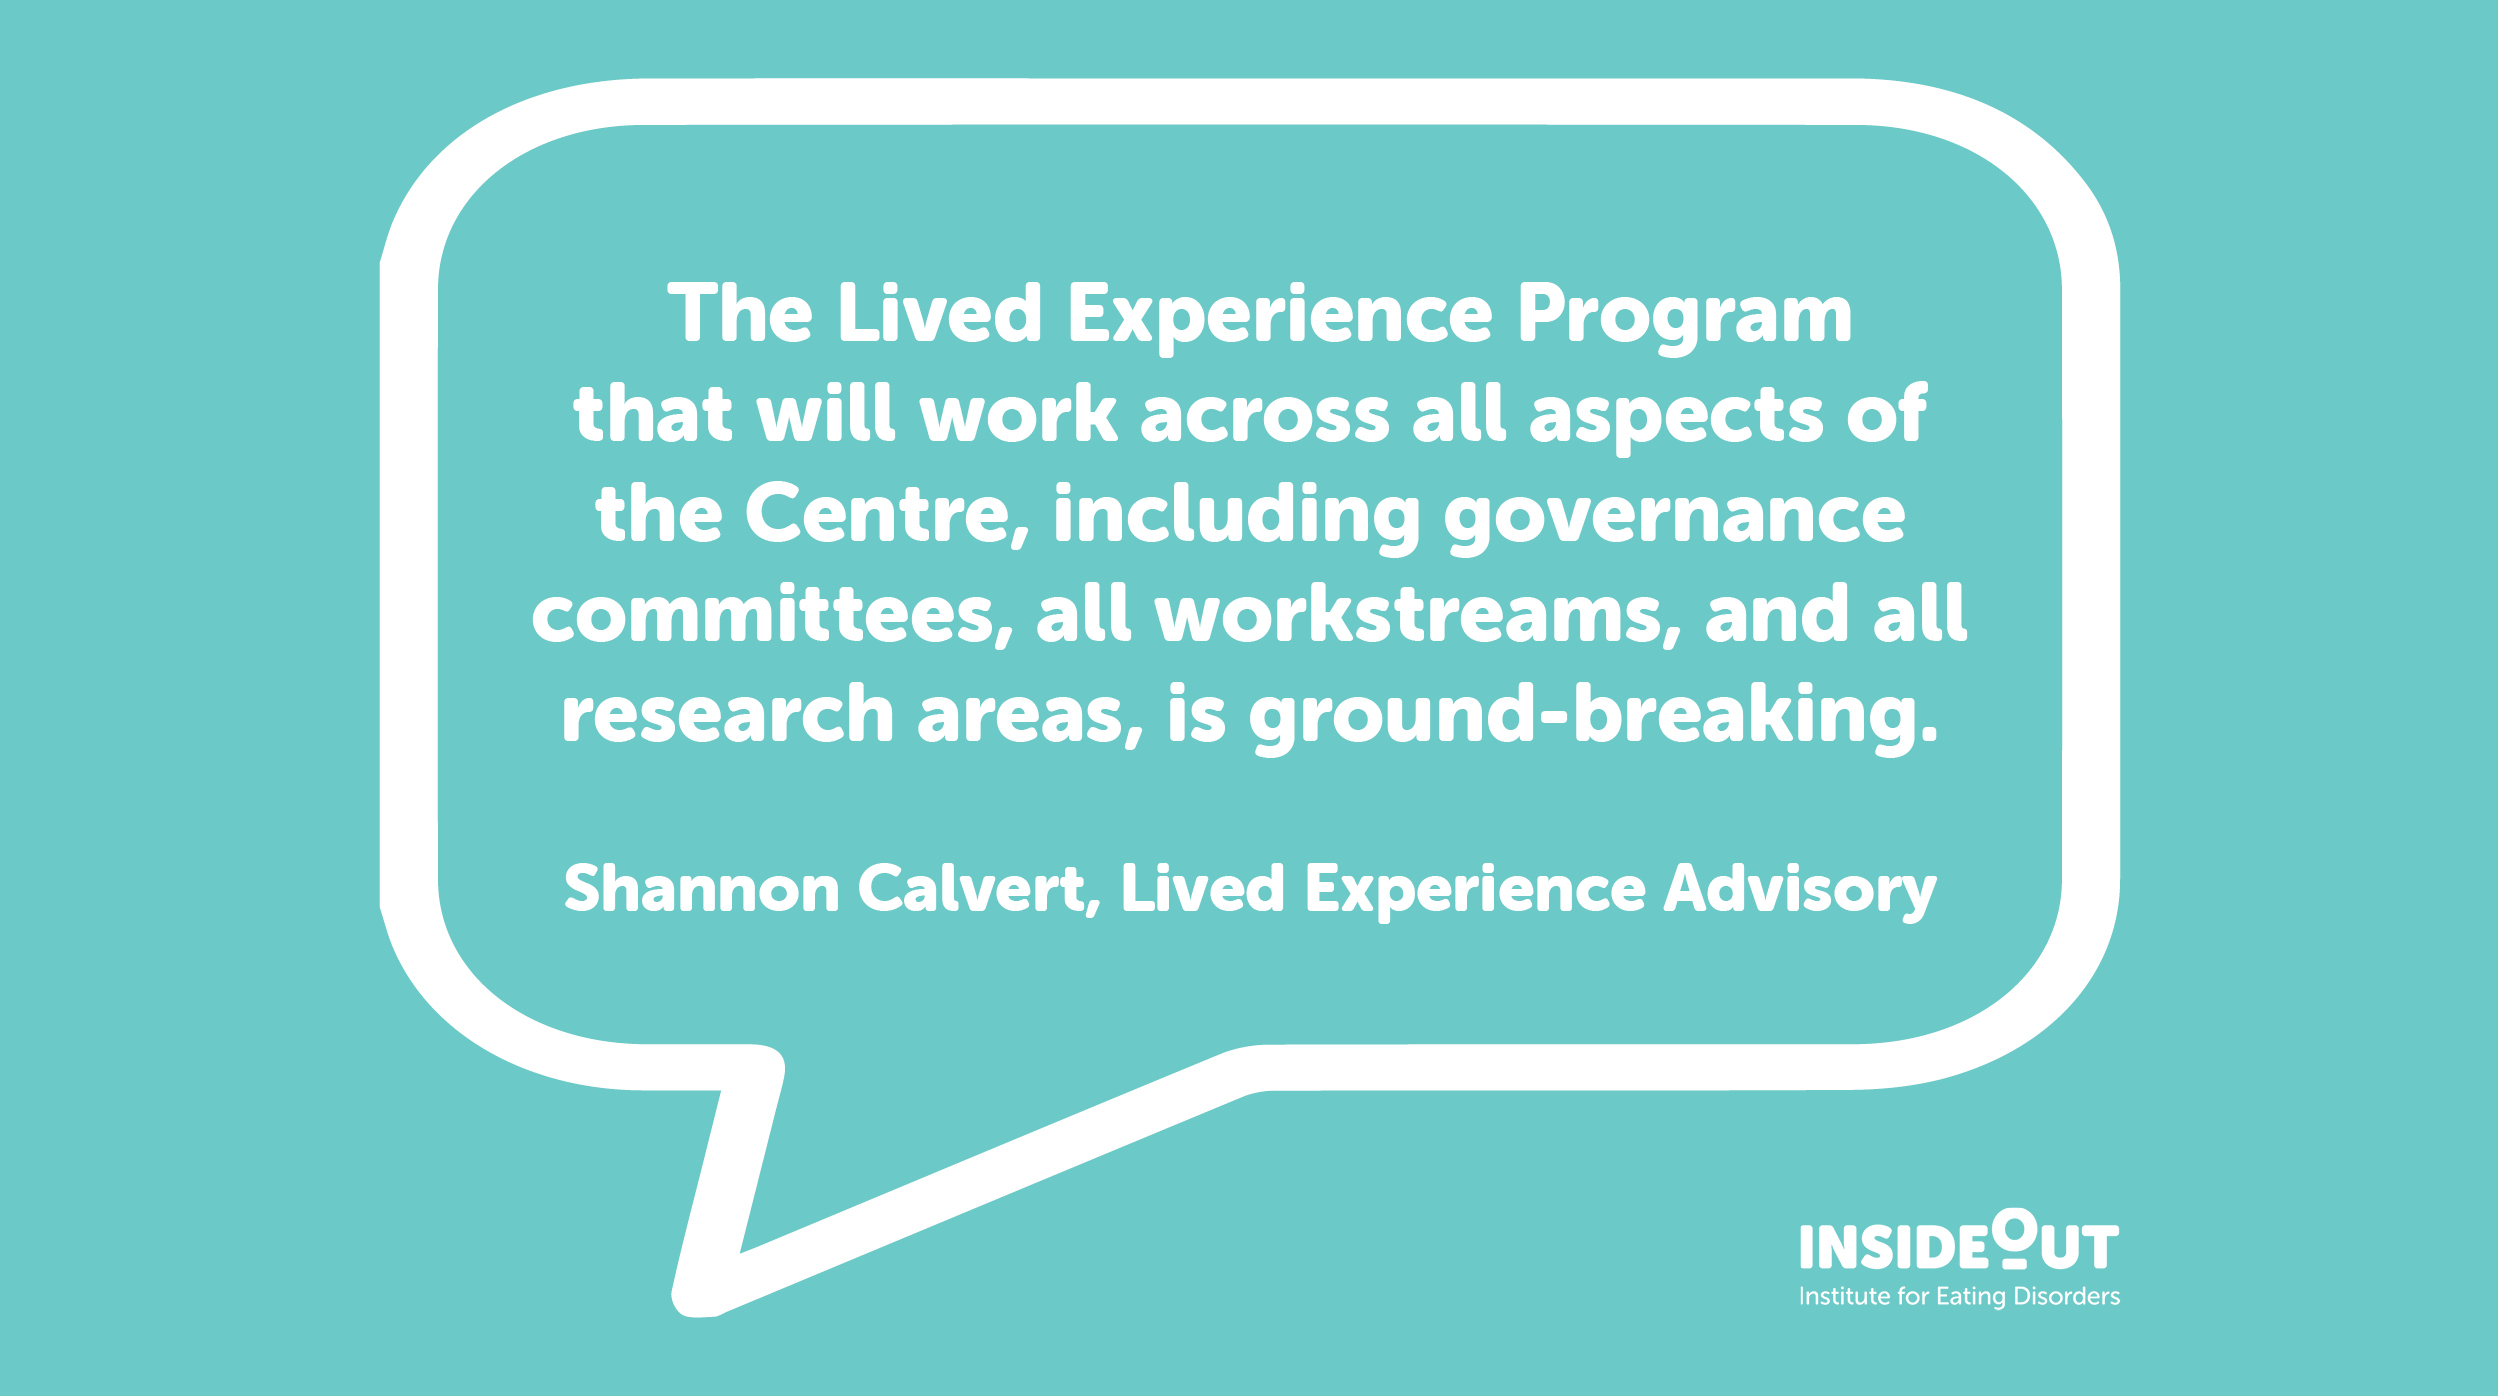 Lived experience advisor Shannon Calvert said, "The Lived Experience Program that will work across all aspects of the Centre, including governance committees, all workstreams, and all research areas, is ground-breaking."